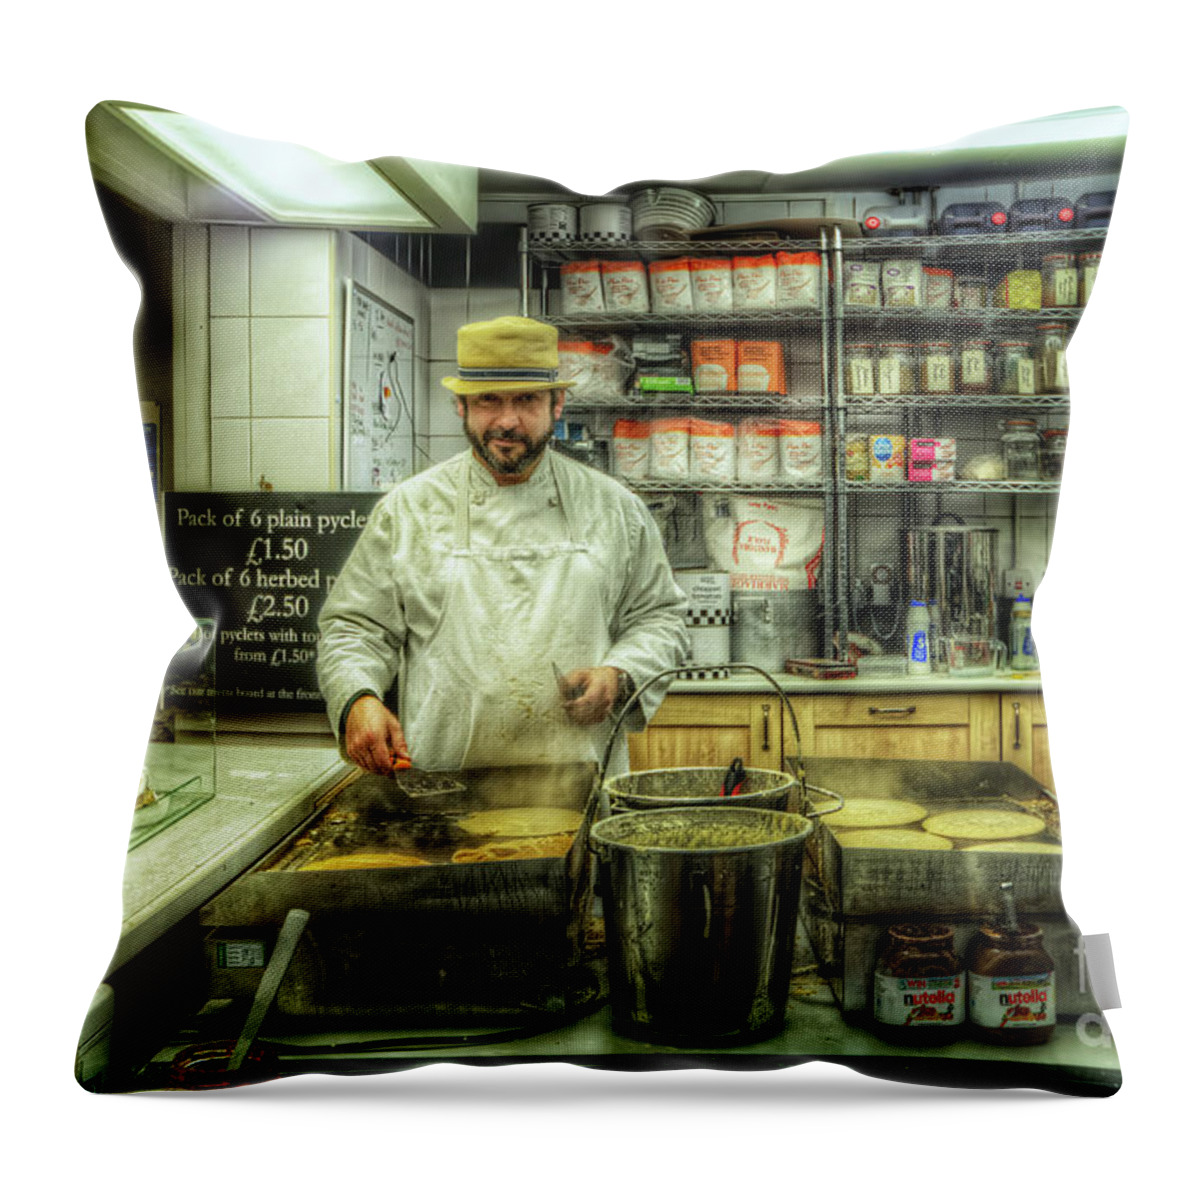 Art Throw Pillow featuring the photograph Derby Pyclet and Oat Cakes by Yhun Suarez